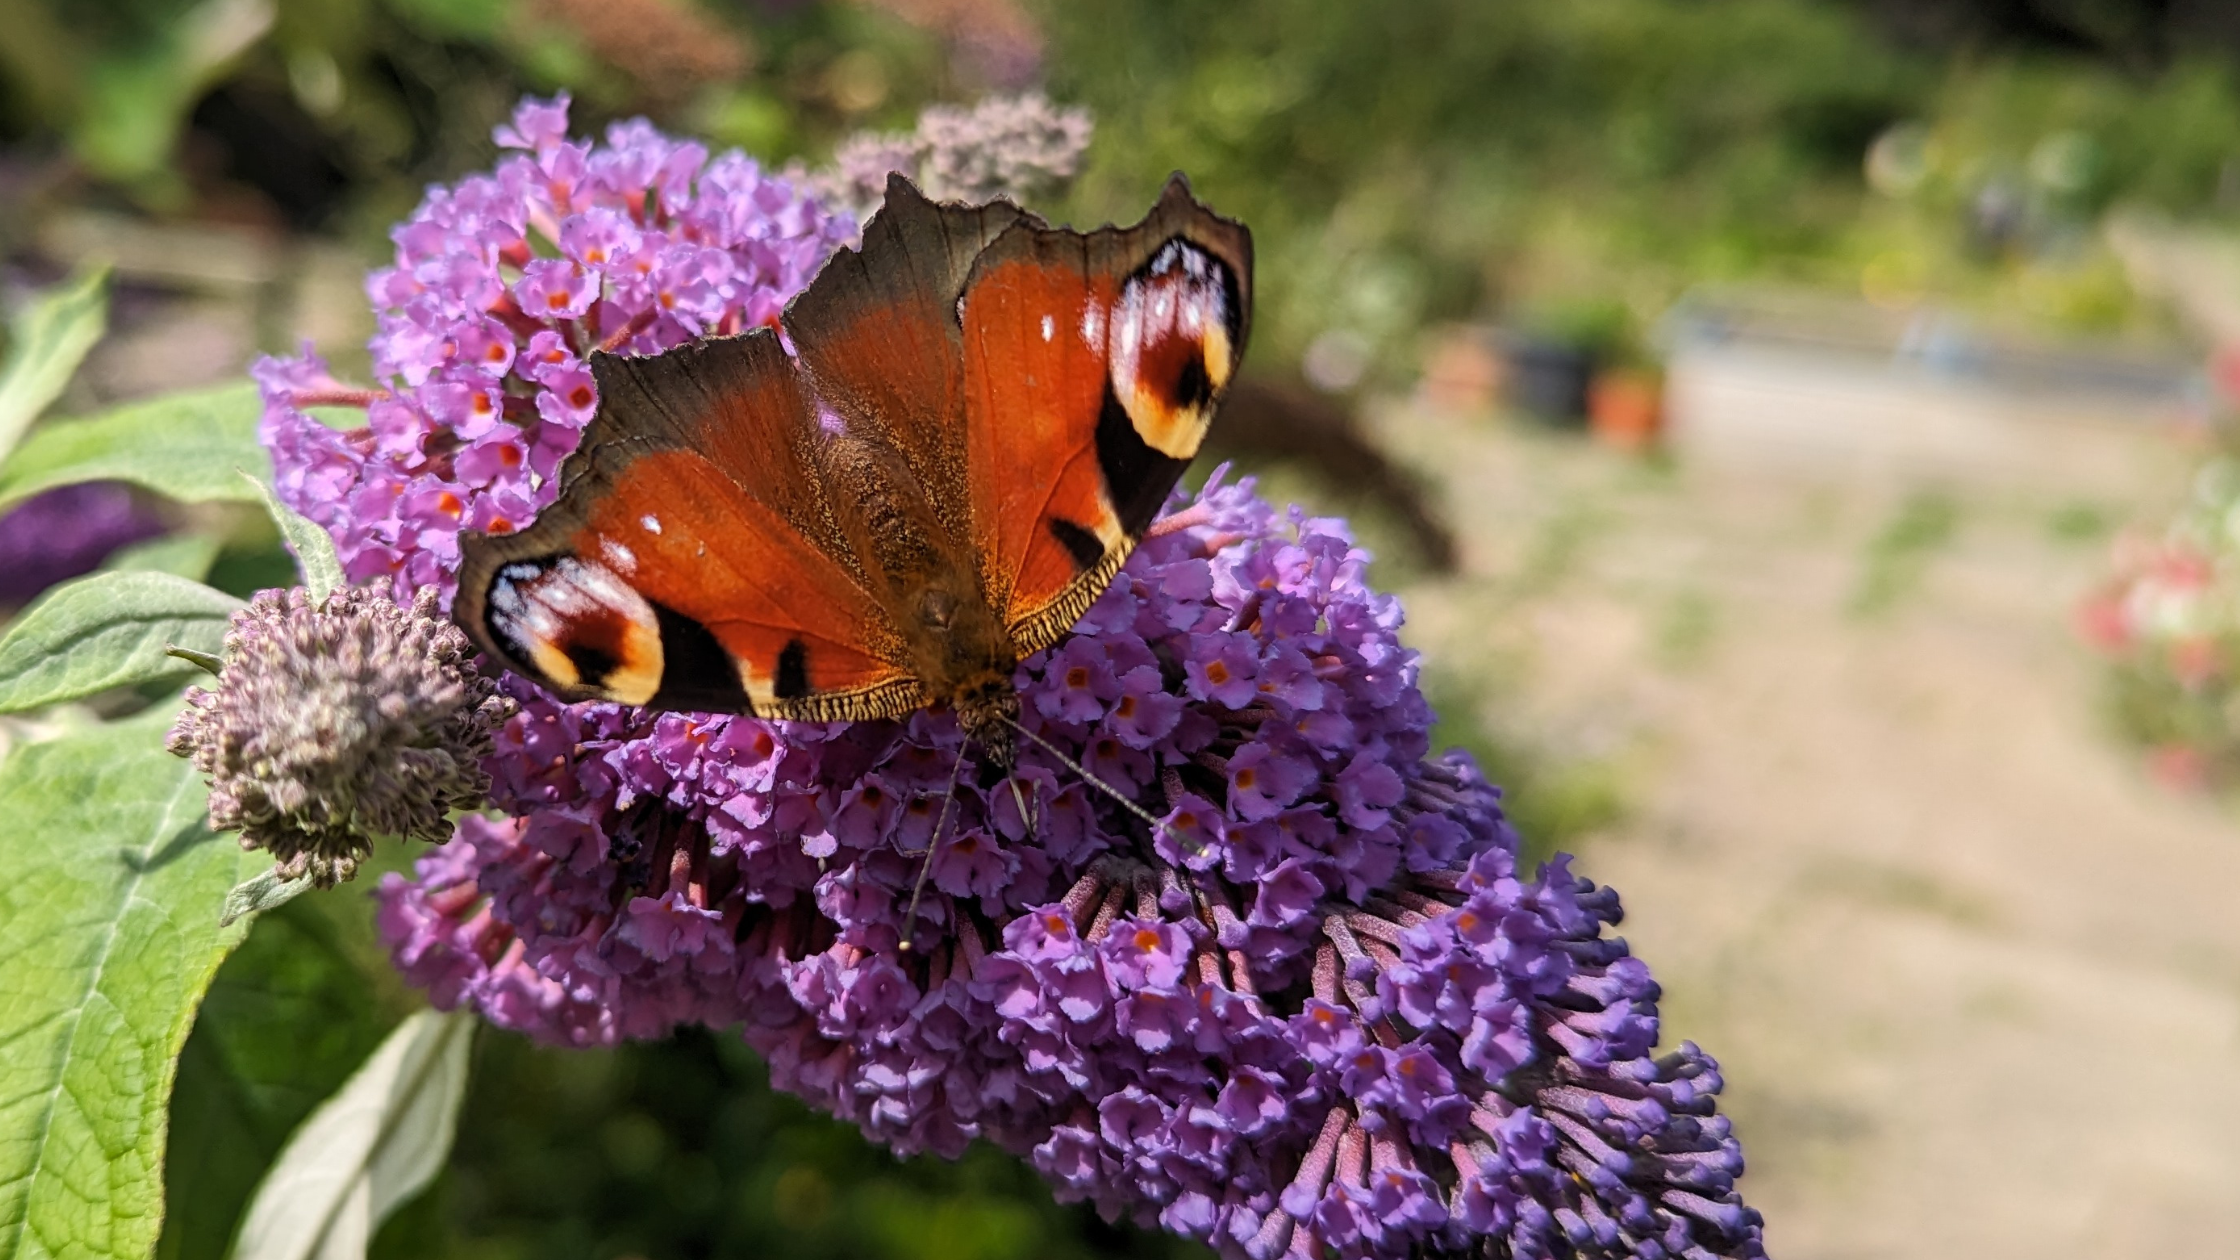 A peacock butterfly at the Gardening Project